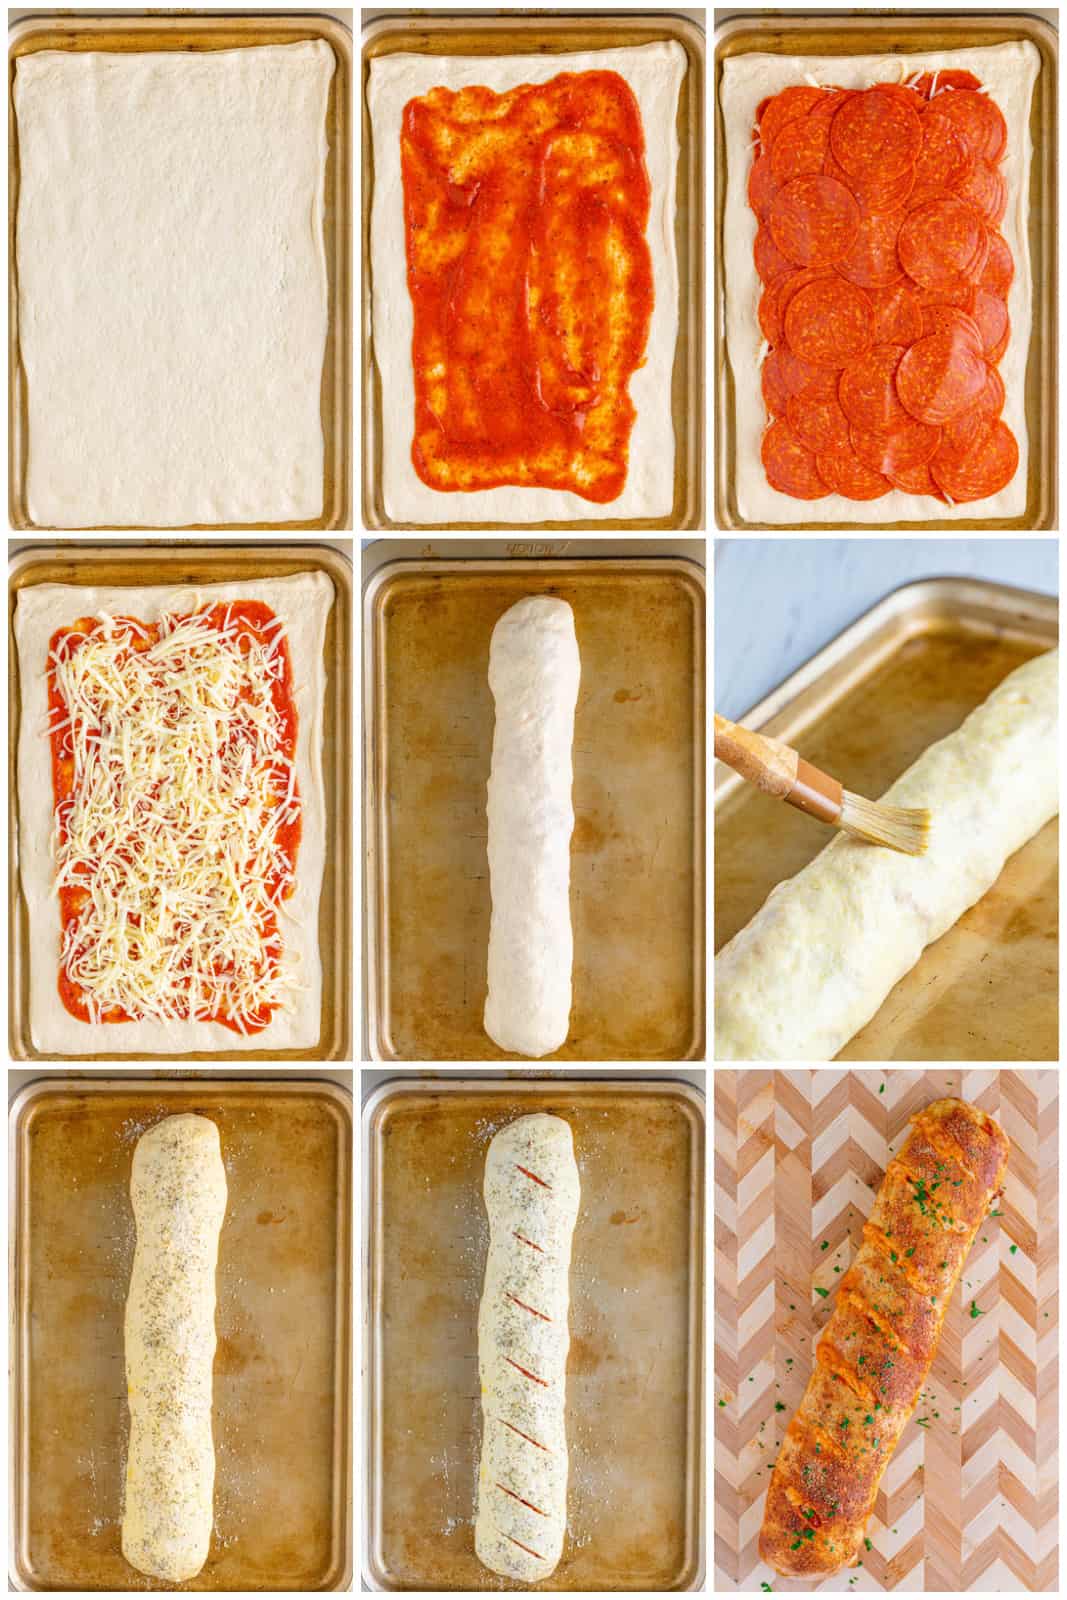 Step by step photos on how to make Pepperoni Stromboli.